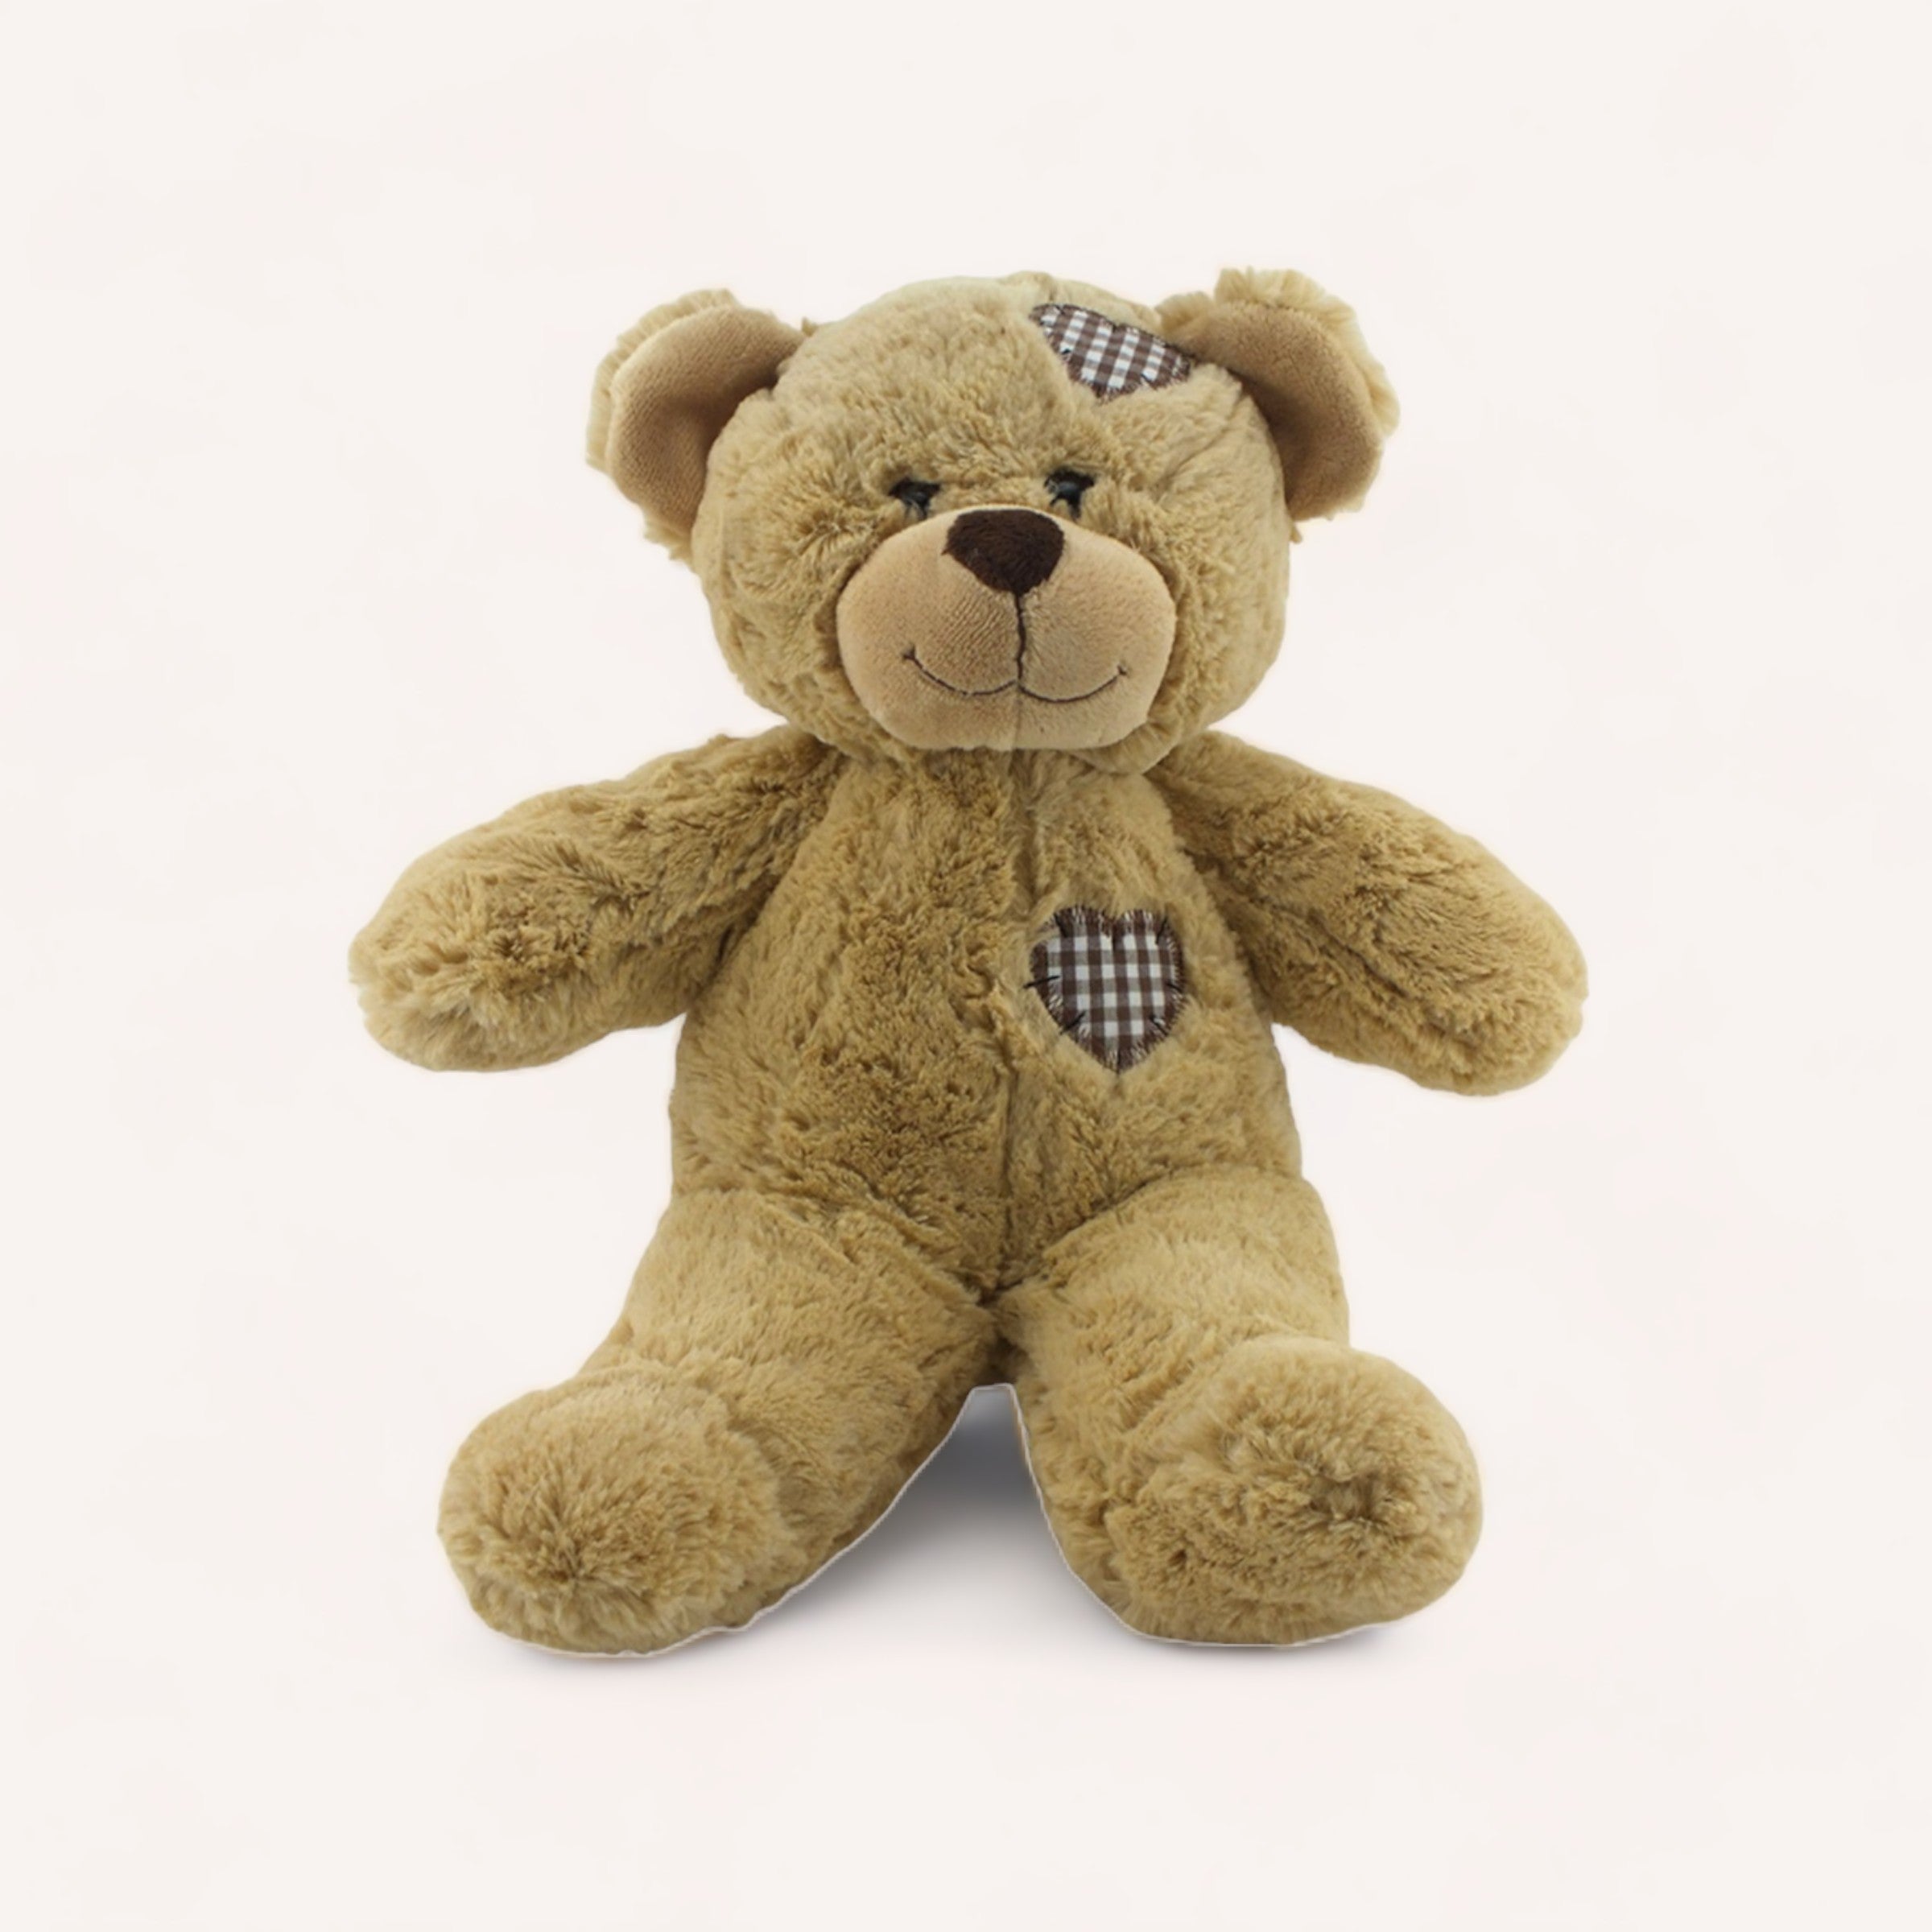 soft cuddly brown teddy bear with patches